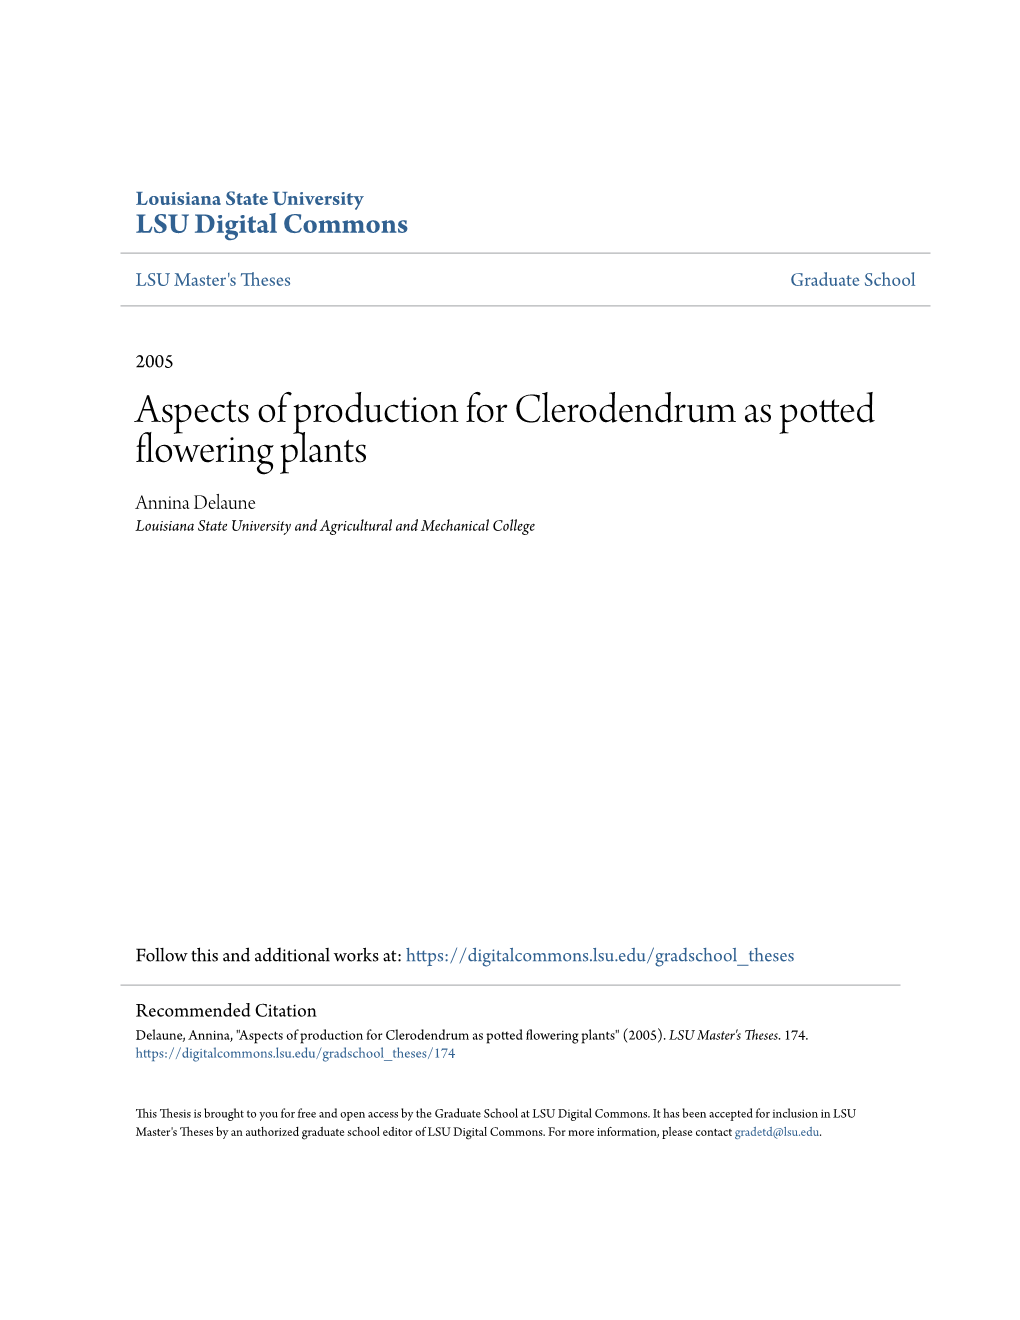 Aspects of Production for Clerodendrum As Potted Flowering Plants Annina Delaune Louisiana State University and Agricultural and Mechanical College